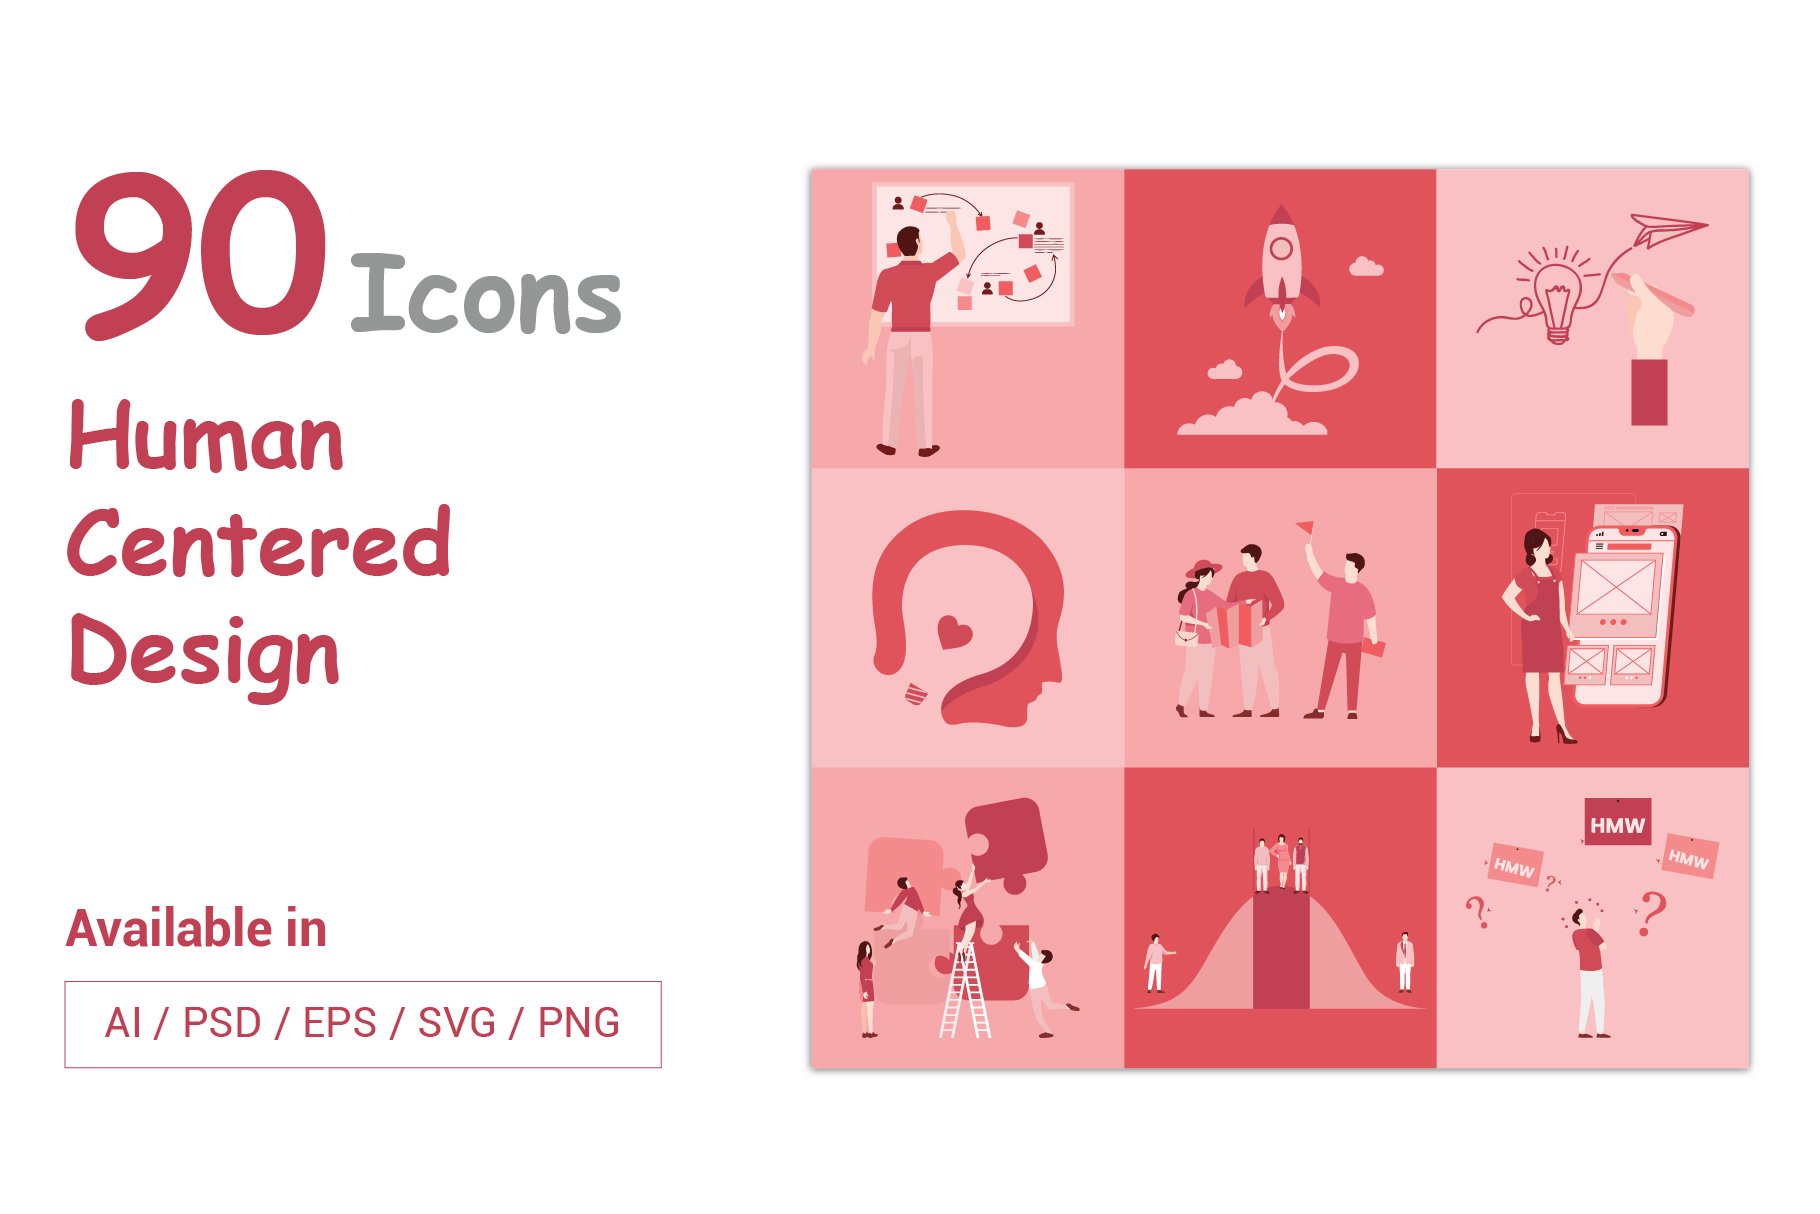 Human-Centered Design Icons Pack cover image.